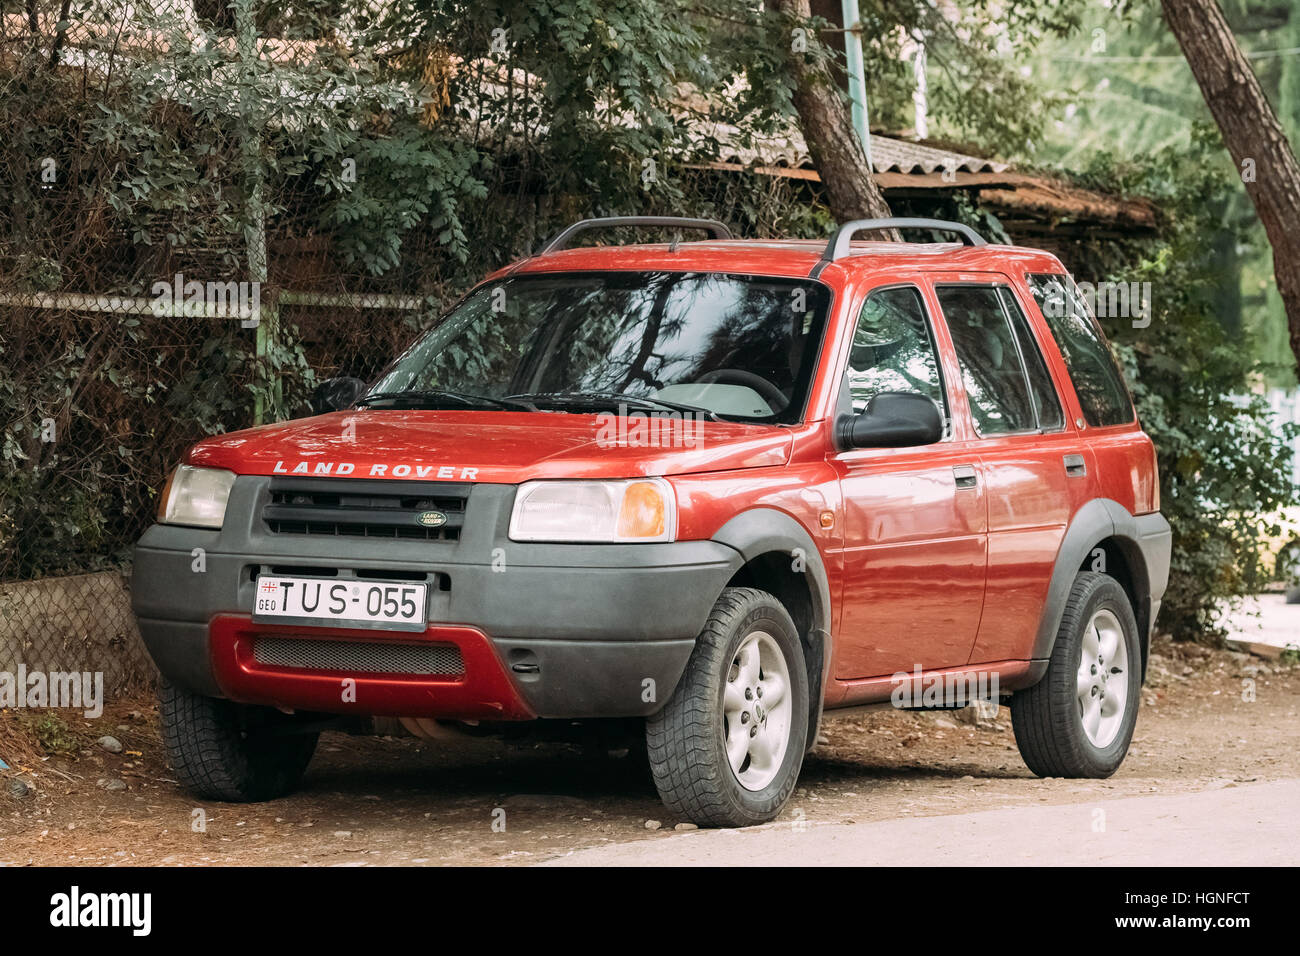 Tbilisi, Georgia - October 21, 2016: Land Rover Freelander is a compact sport utility vehicle (SUV) which was produced by the British manufacturer Lan Stock Photo